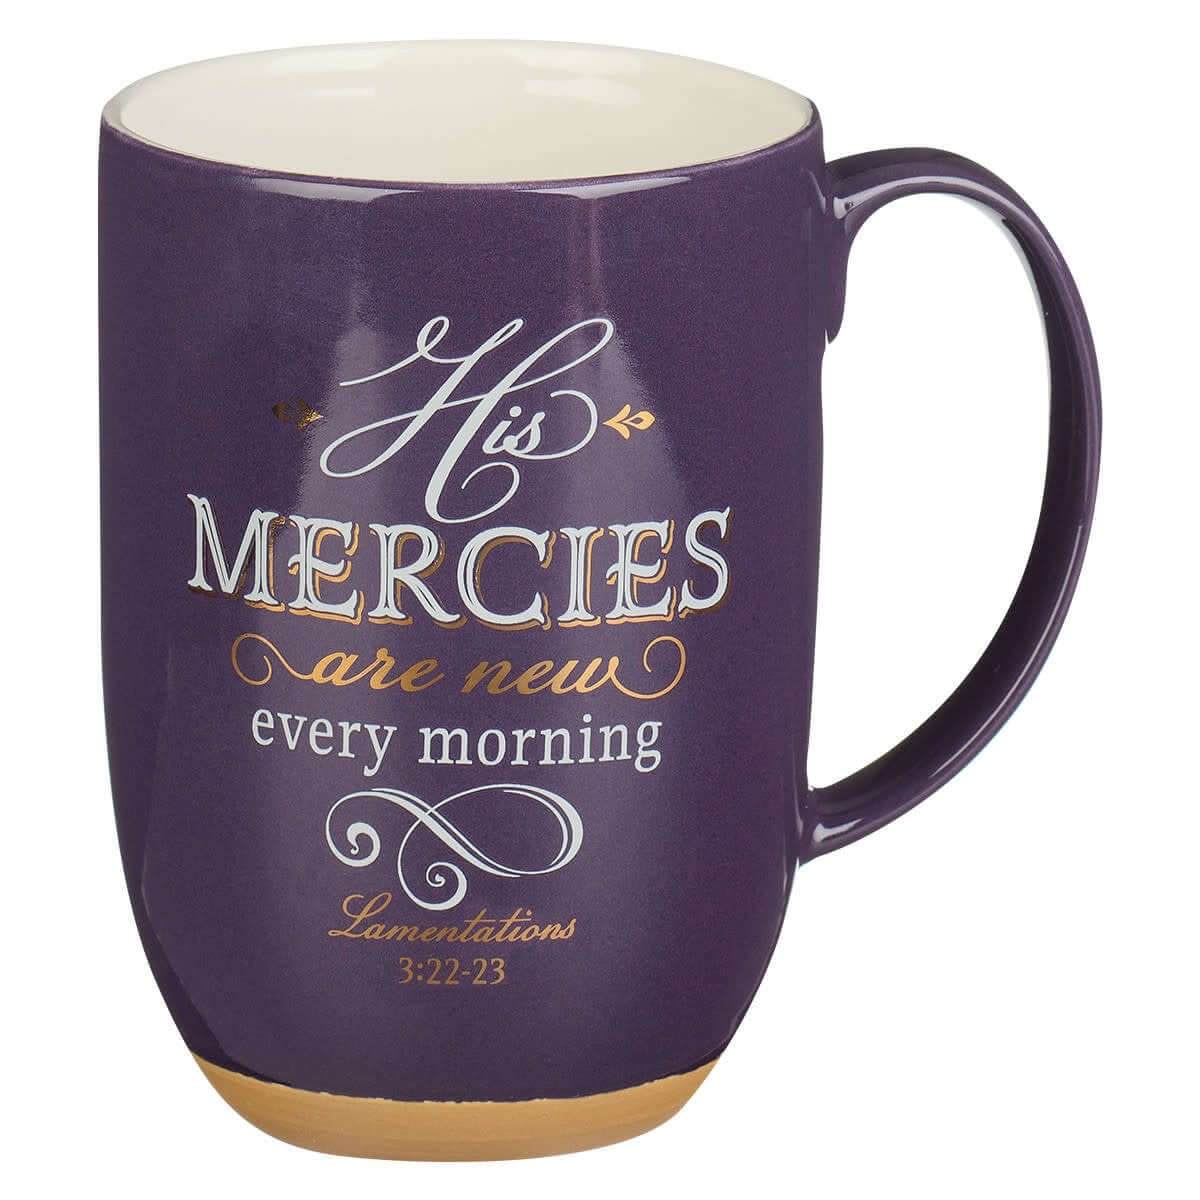 His Mercies are New Purple Ceramic Coffee Mug with Exposed Clay Base - Lamentations 3:22-23 | 2FruitBearers